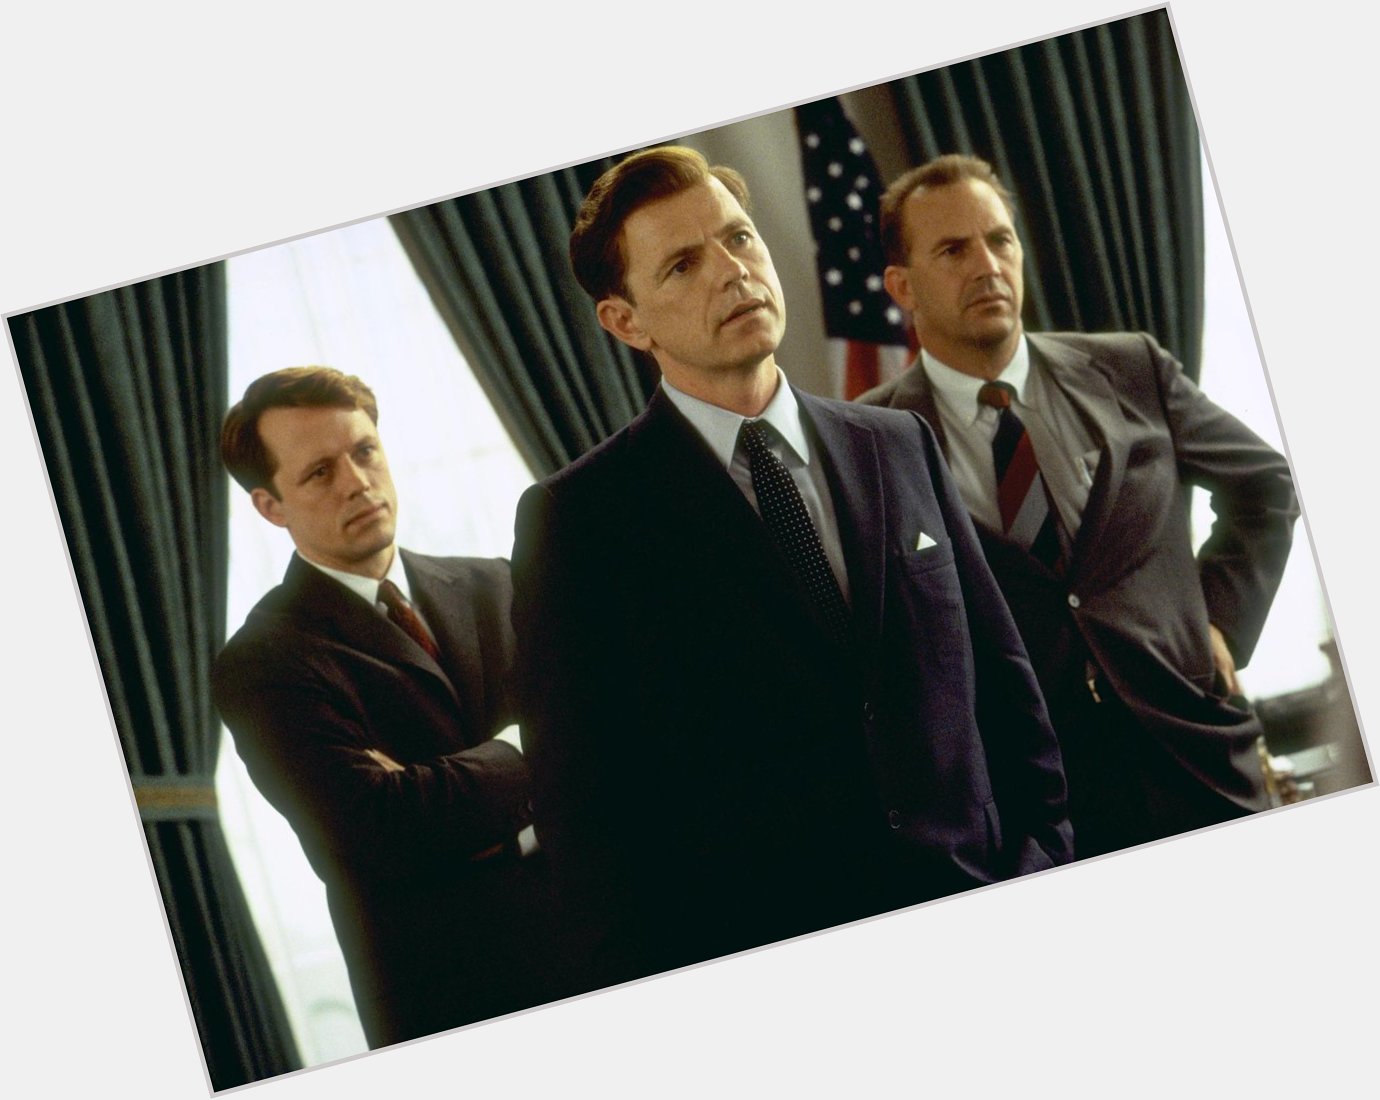 Happy Birthday to Bruce Greenwood(middle), who turns 61 today! 